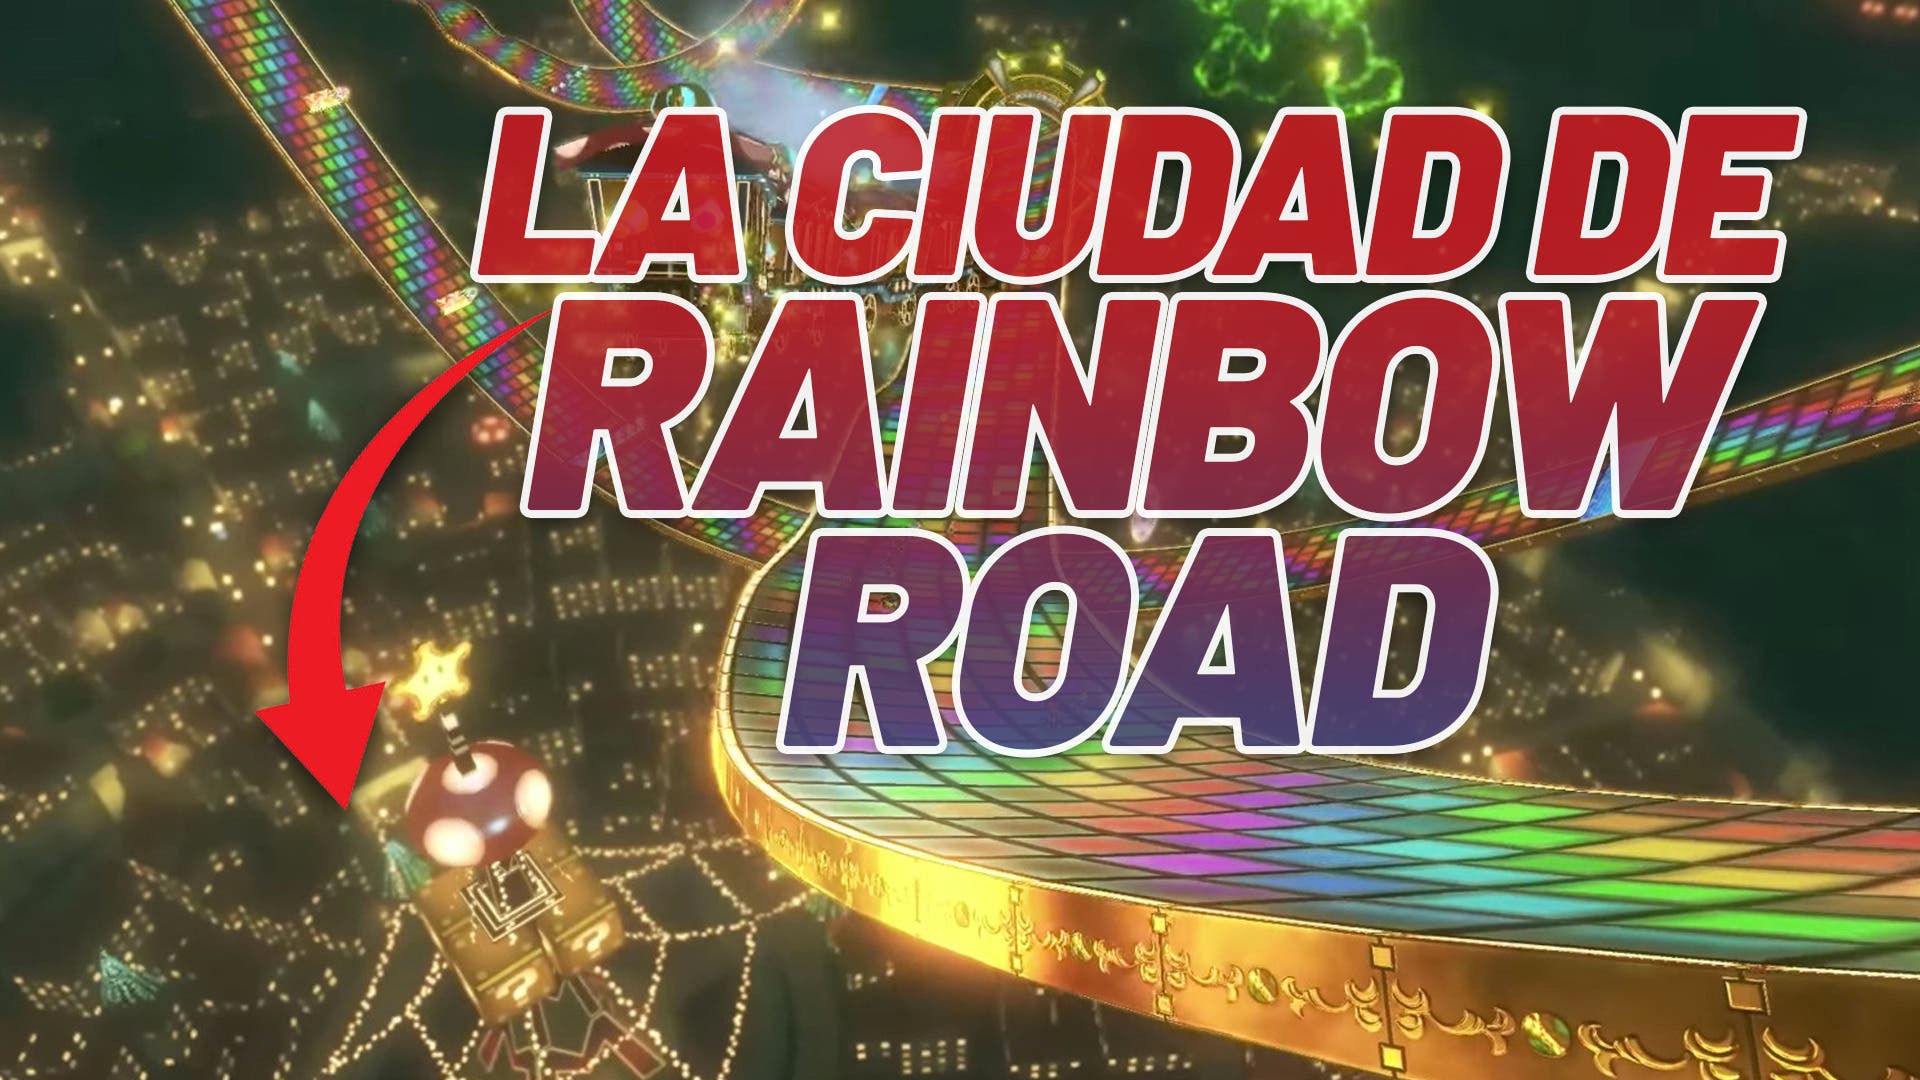 A Mario Kart player manages to get off the track on Rainbow Road and navigate the town below